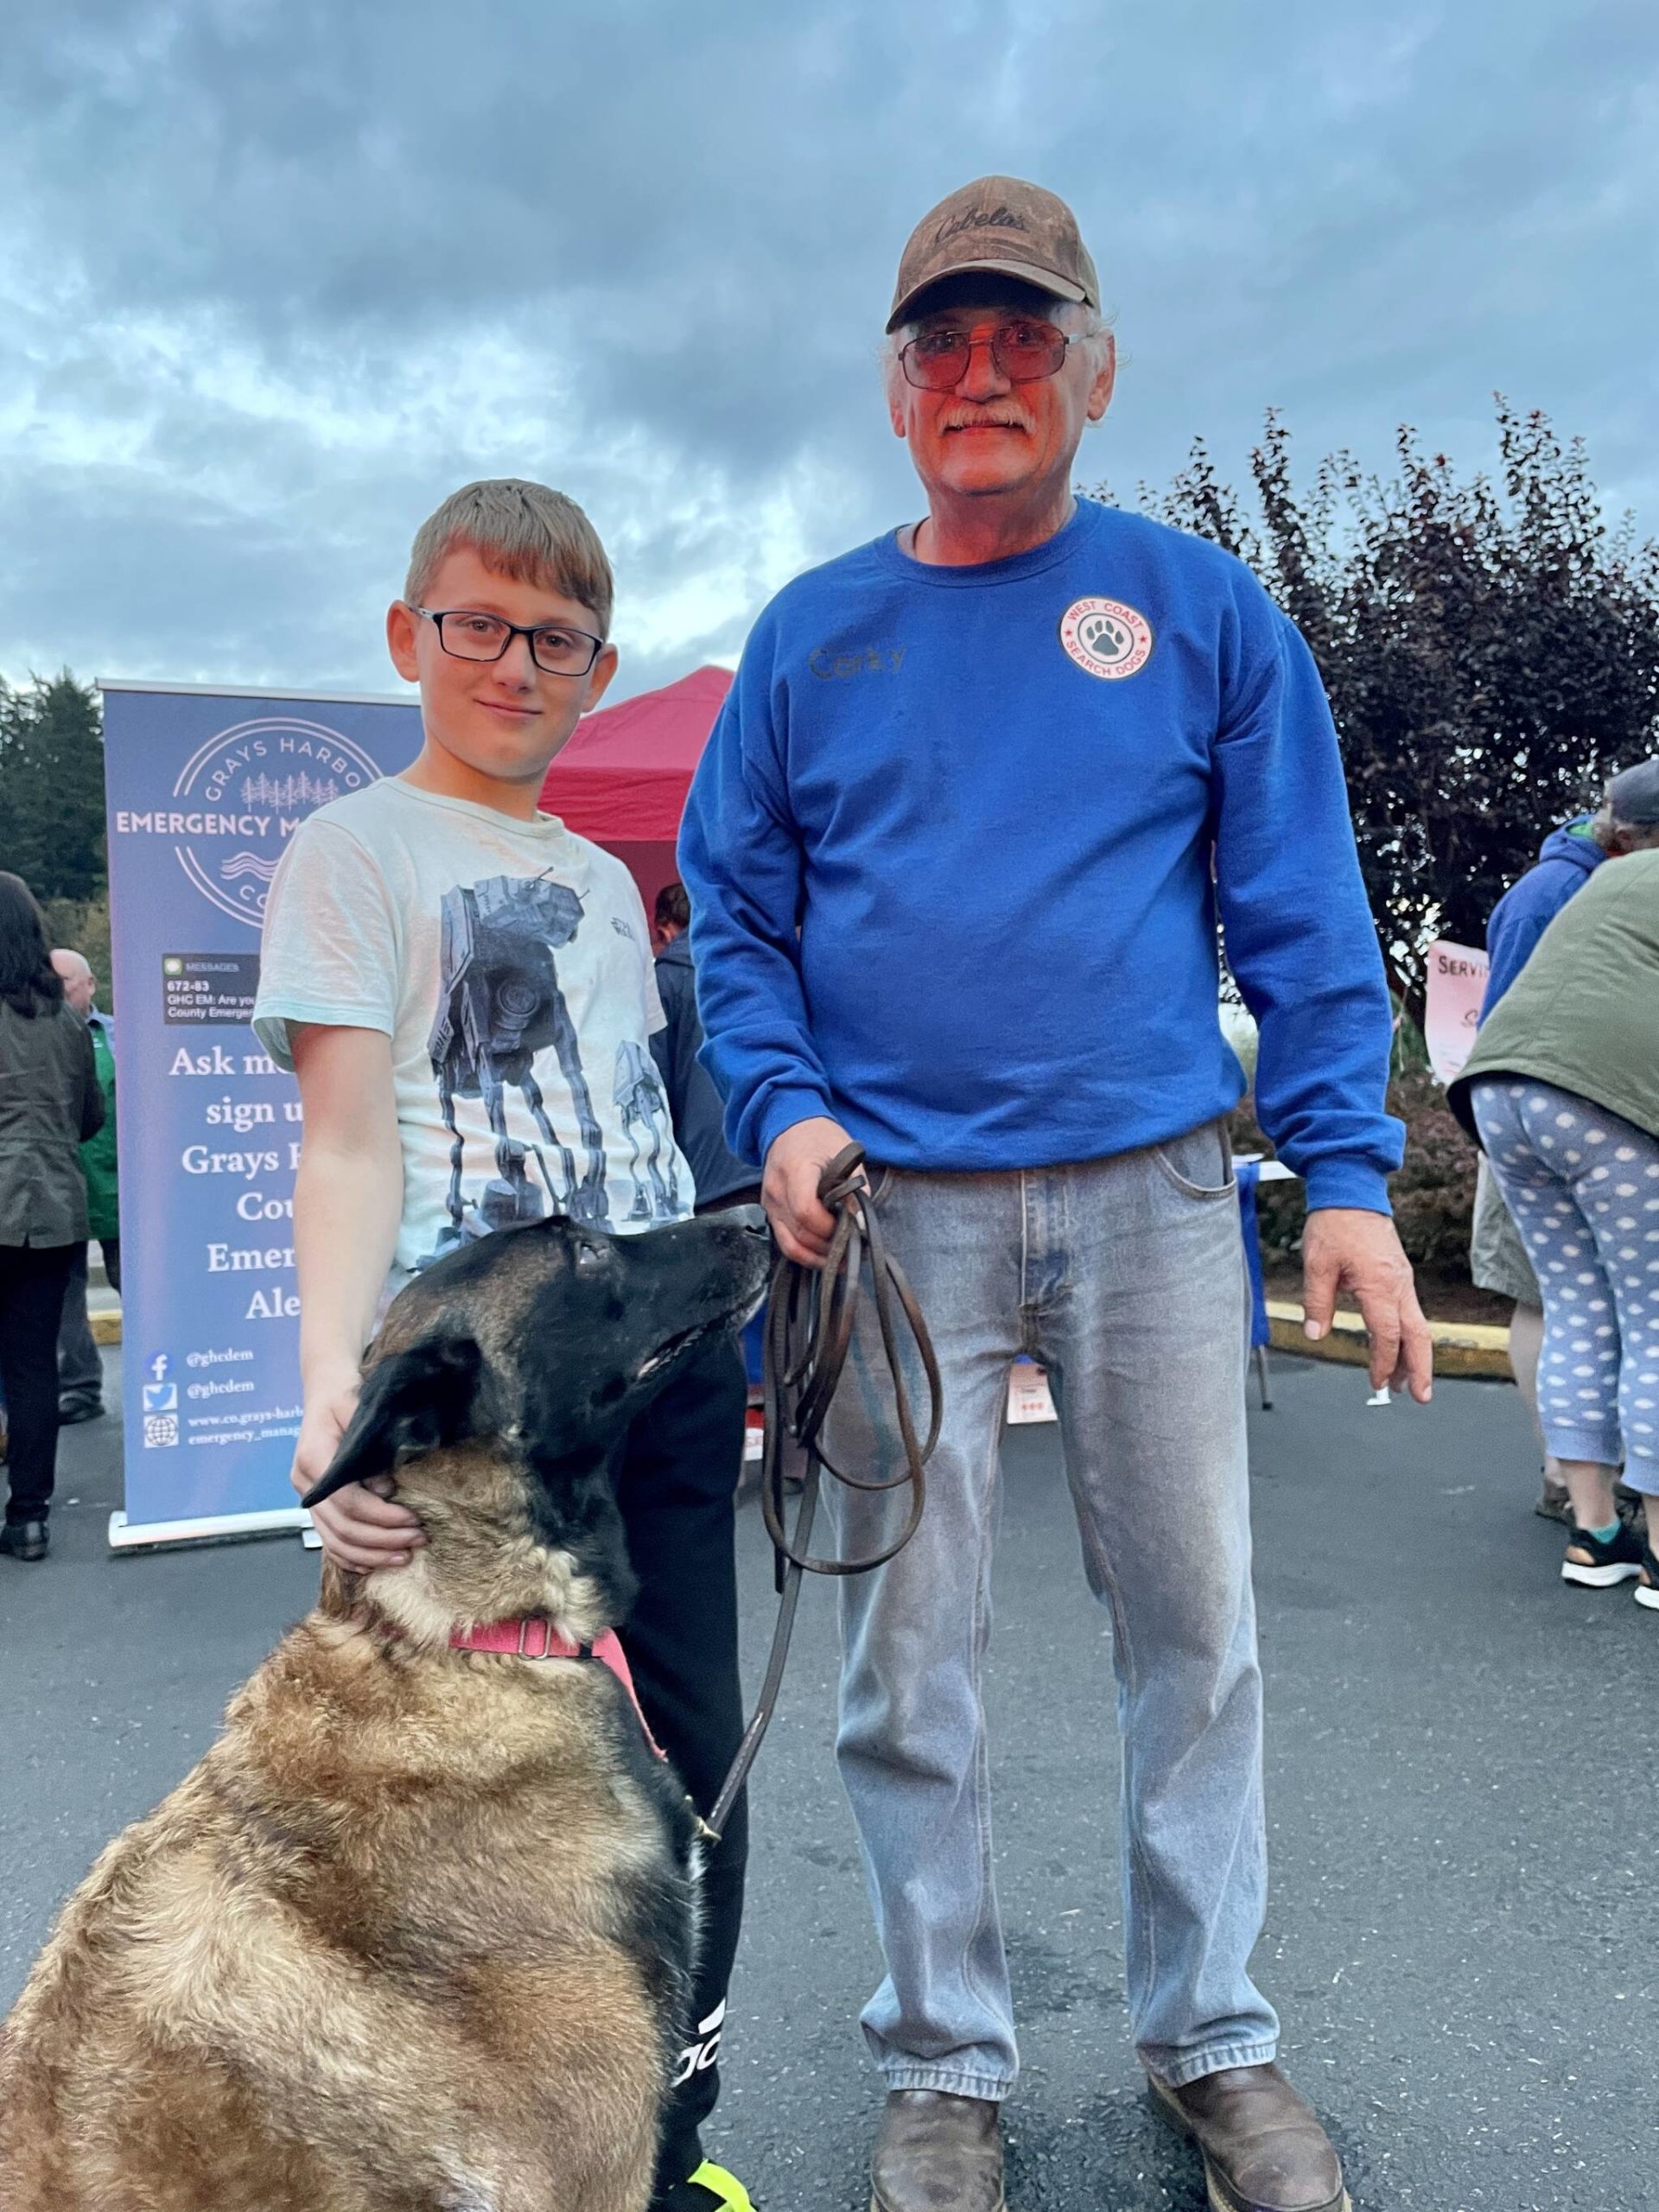 Michael S. Lockett / The Daily World
Harold Steinman, left, pets Hanna, a 7-year-old Belgian Malinois who, along with John Watkins, right, is part of the West Coast Search Dogs, at Badges & Brews, hosted at Starbucks.